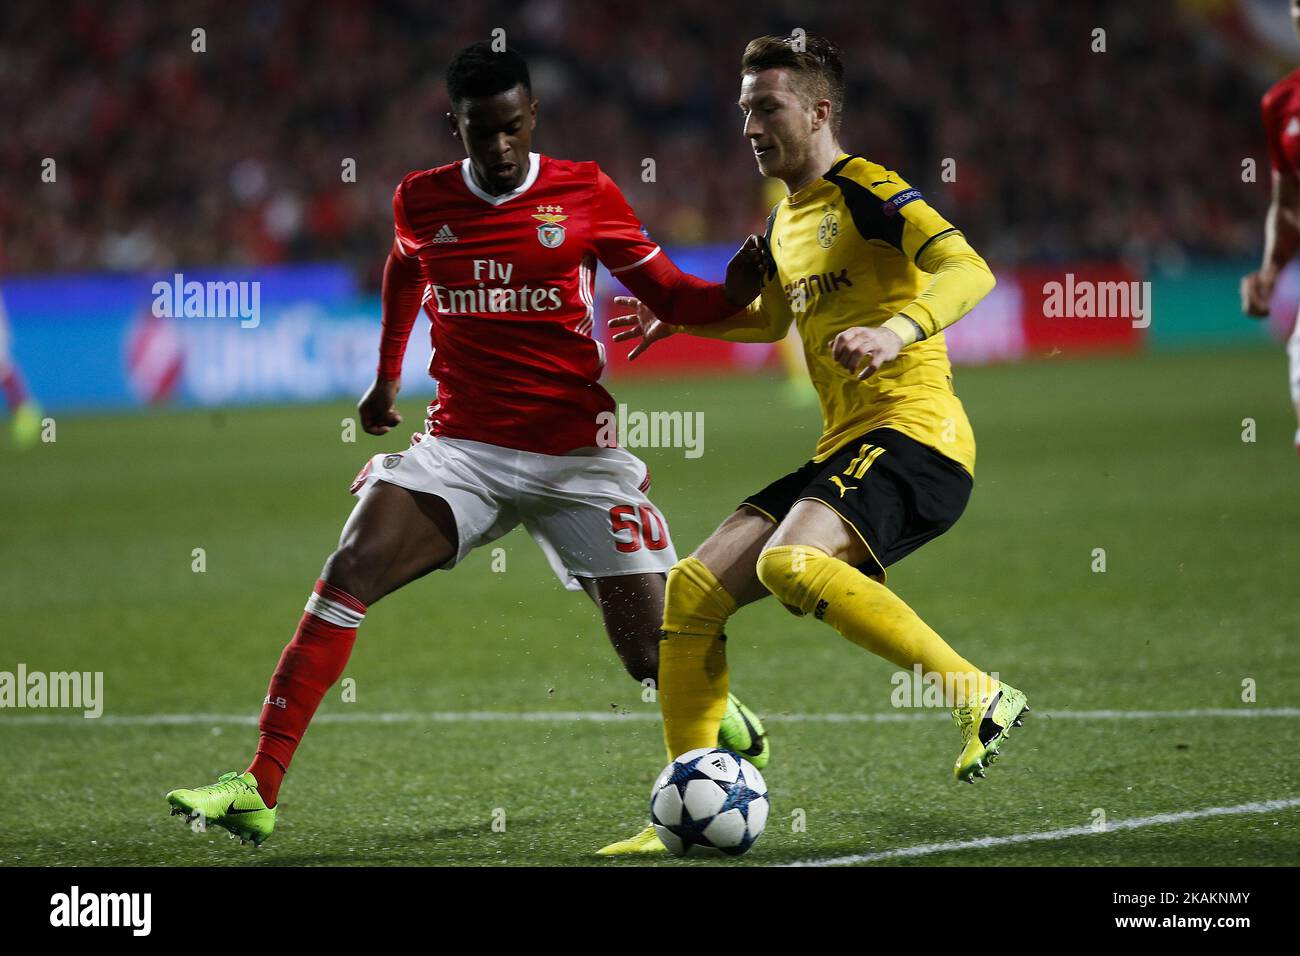 Benfica's defender Nelson Semedo (L) vies for the ball with Dortmund's midfielder Marco Reus (R) during Champions League 2016/17 match between SL Benfica vs BVB Borussia Dortmund, in Lisbon, on February 14, 2017. (Photo by Carlos Palma/NurPhoto) *** Please Use Credit from Credit Field *** Stock Photo